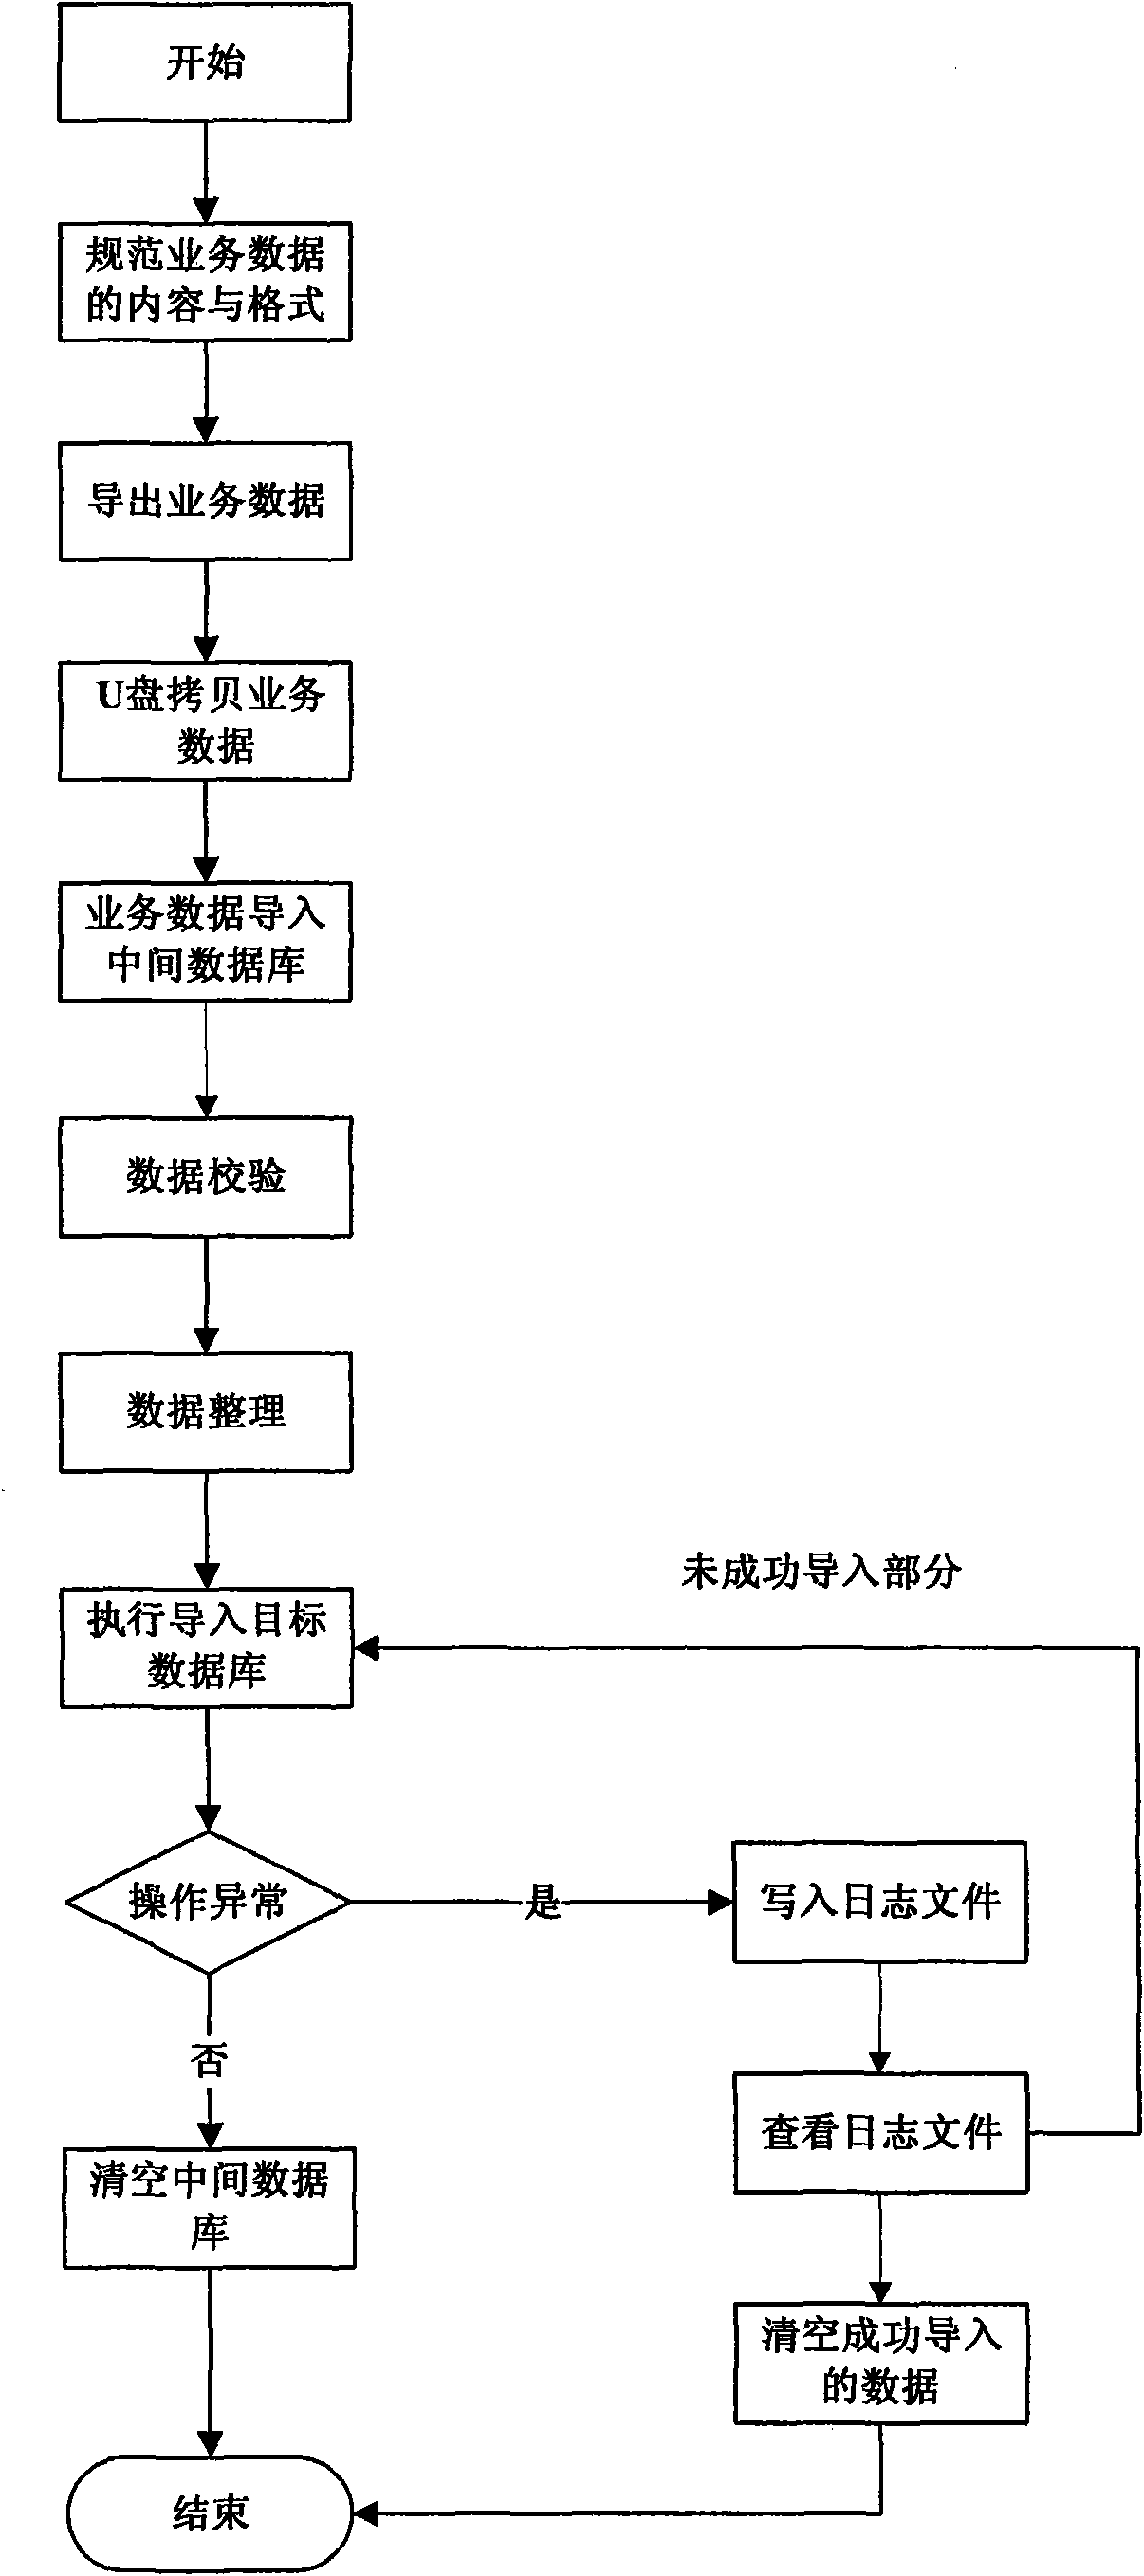 Method for synchronizing data between different databases under physical isolating condition